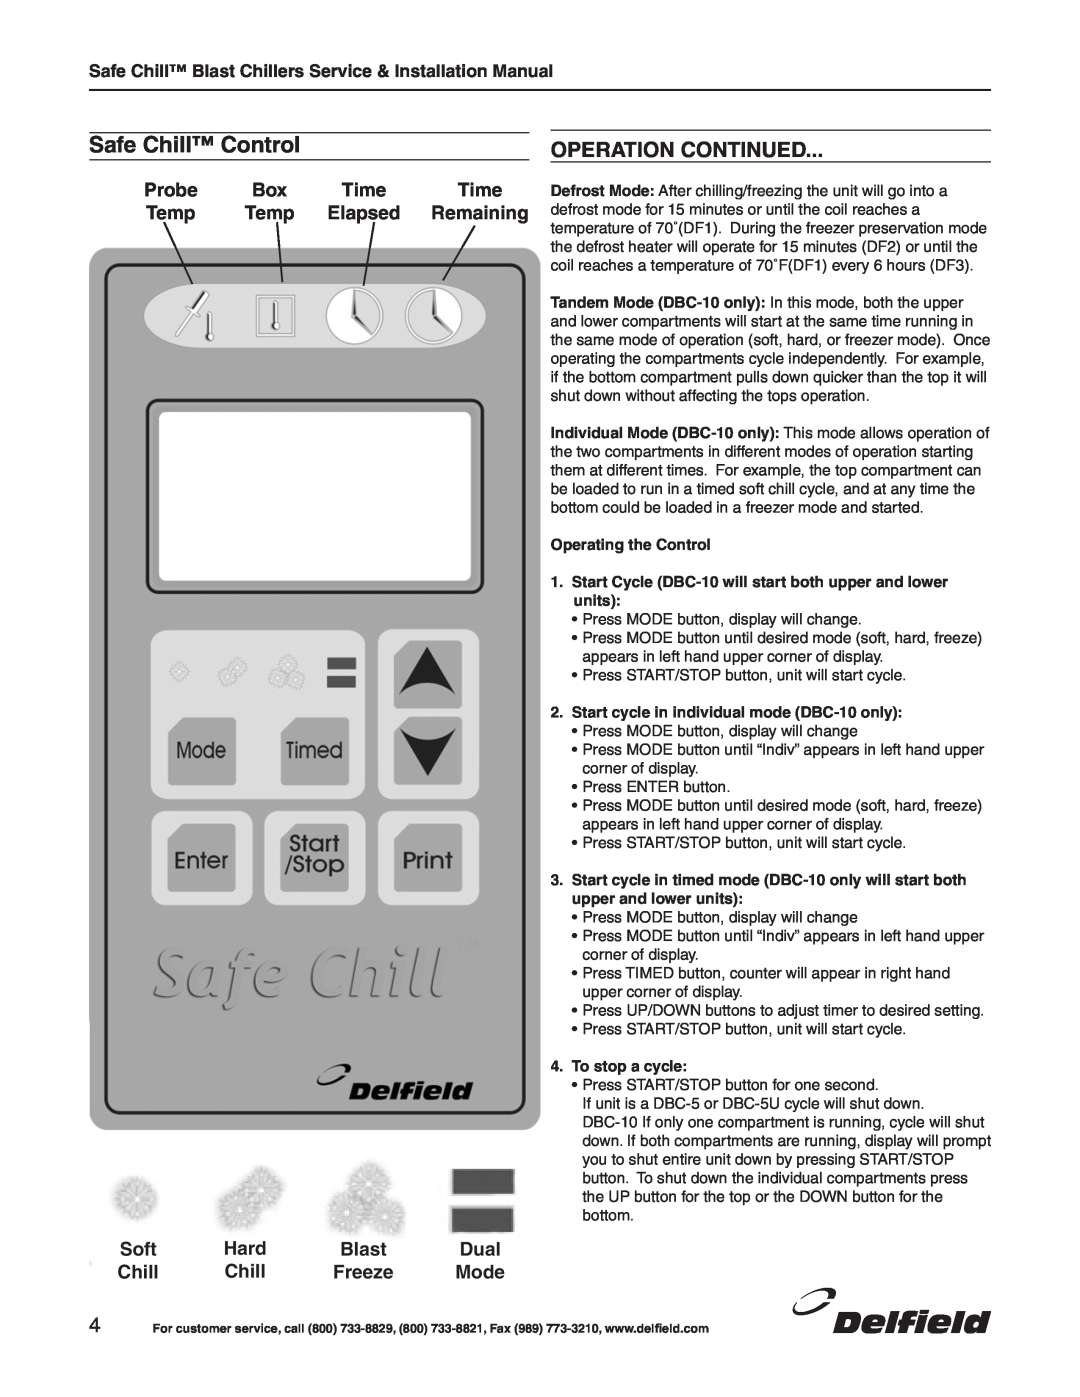 Delfield DBC-10 Safe Chill Control, Operation Continued, Probe, Time, Temp, Elapsed, Remaining, Soft, Hard, Blast, Dual 